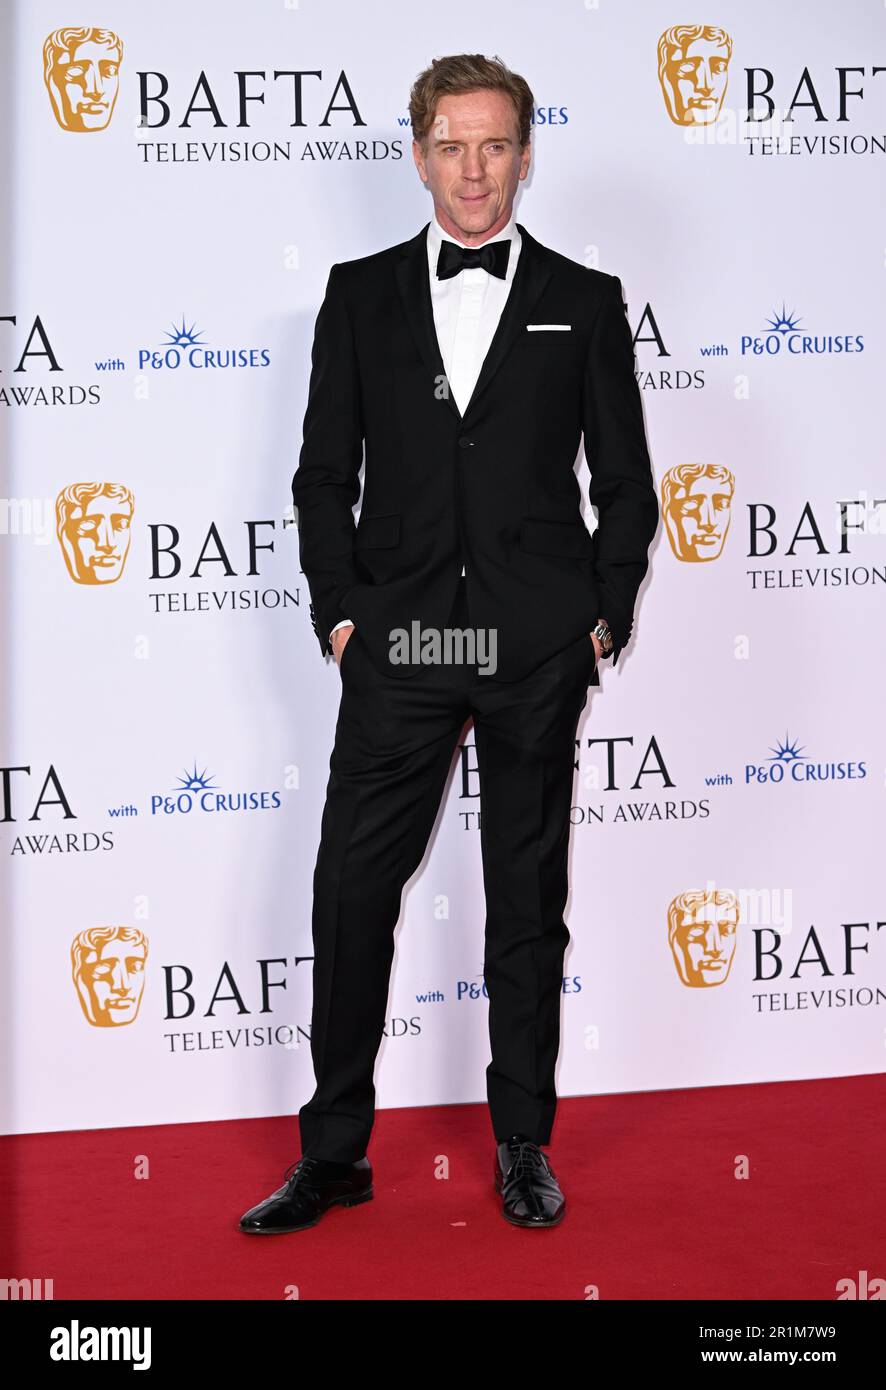 London, UK. 14th May, 2023. London, UK. May 14th, 2023. Damien Lewis at the BAFTA Television Awards with P&O Cruises, the Royal Festival Hall, London. Credit: Doug Peters/Alamy Live News Stock Photo